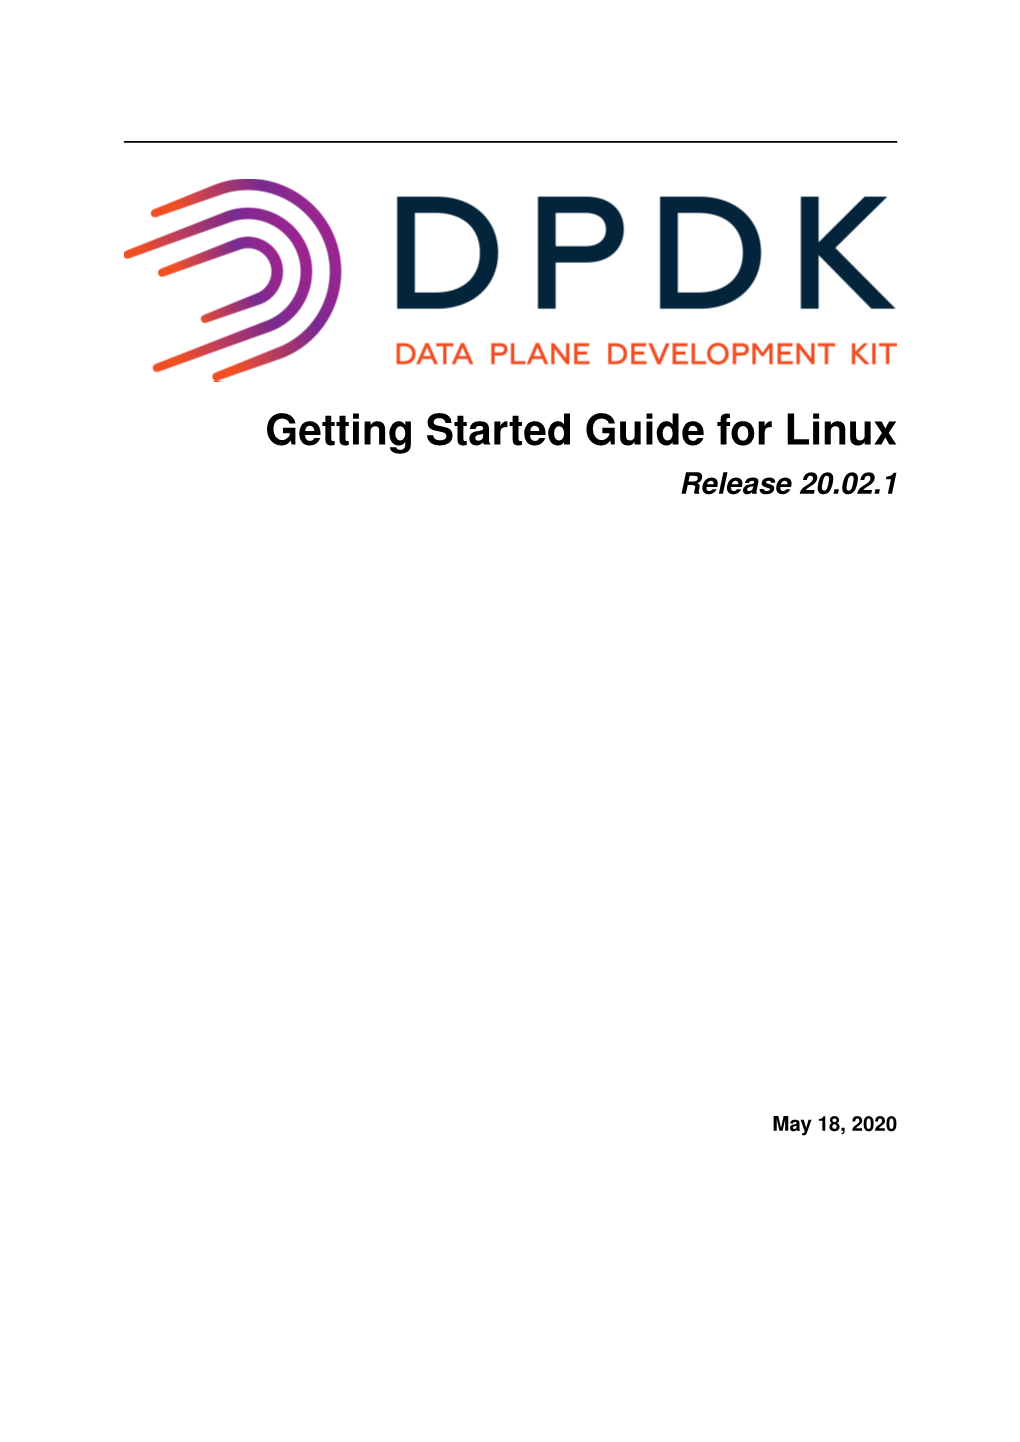 Getting Started Guide for Linux Release 20.02.1